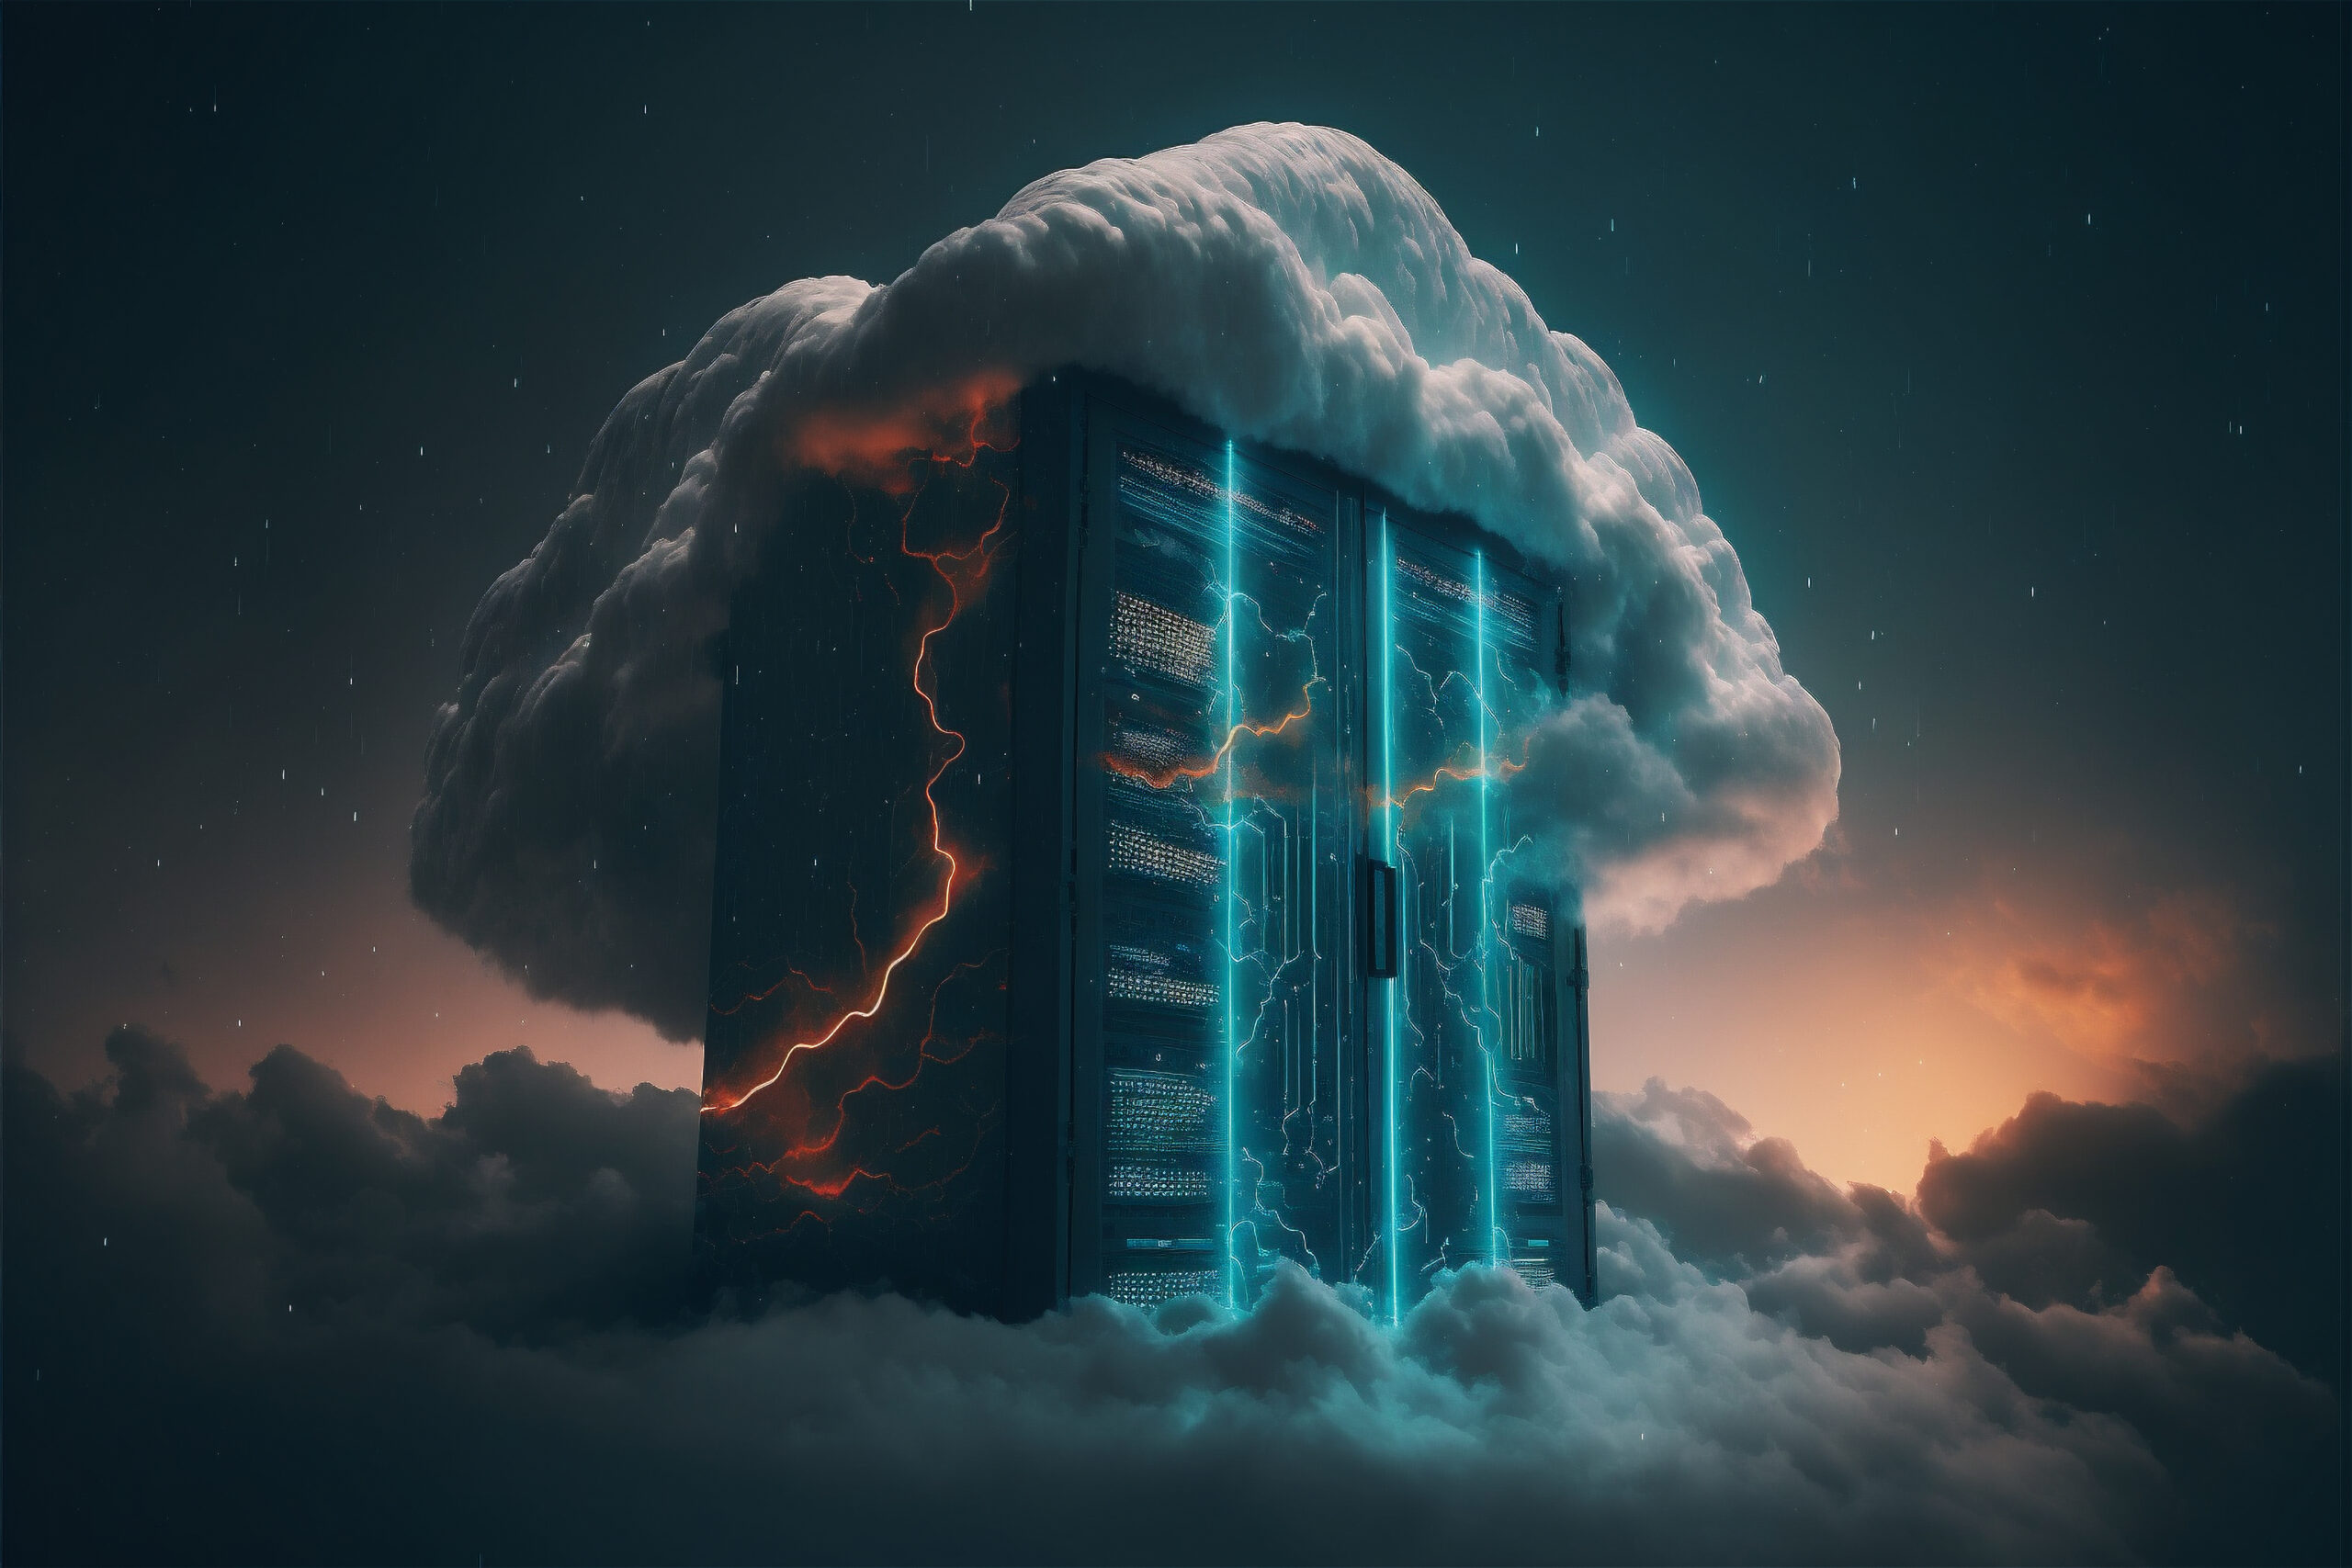 Veeam Launches Veeam Data Cloud Vault-A Secured Cloud Storage that enables users to securely store backup data not only off-site, but in an always-immutable and encrypted format, providing additional layers of protection for critical information.